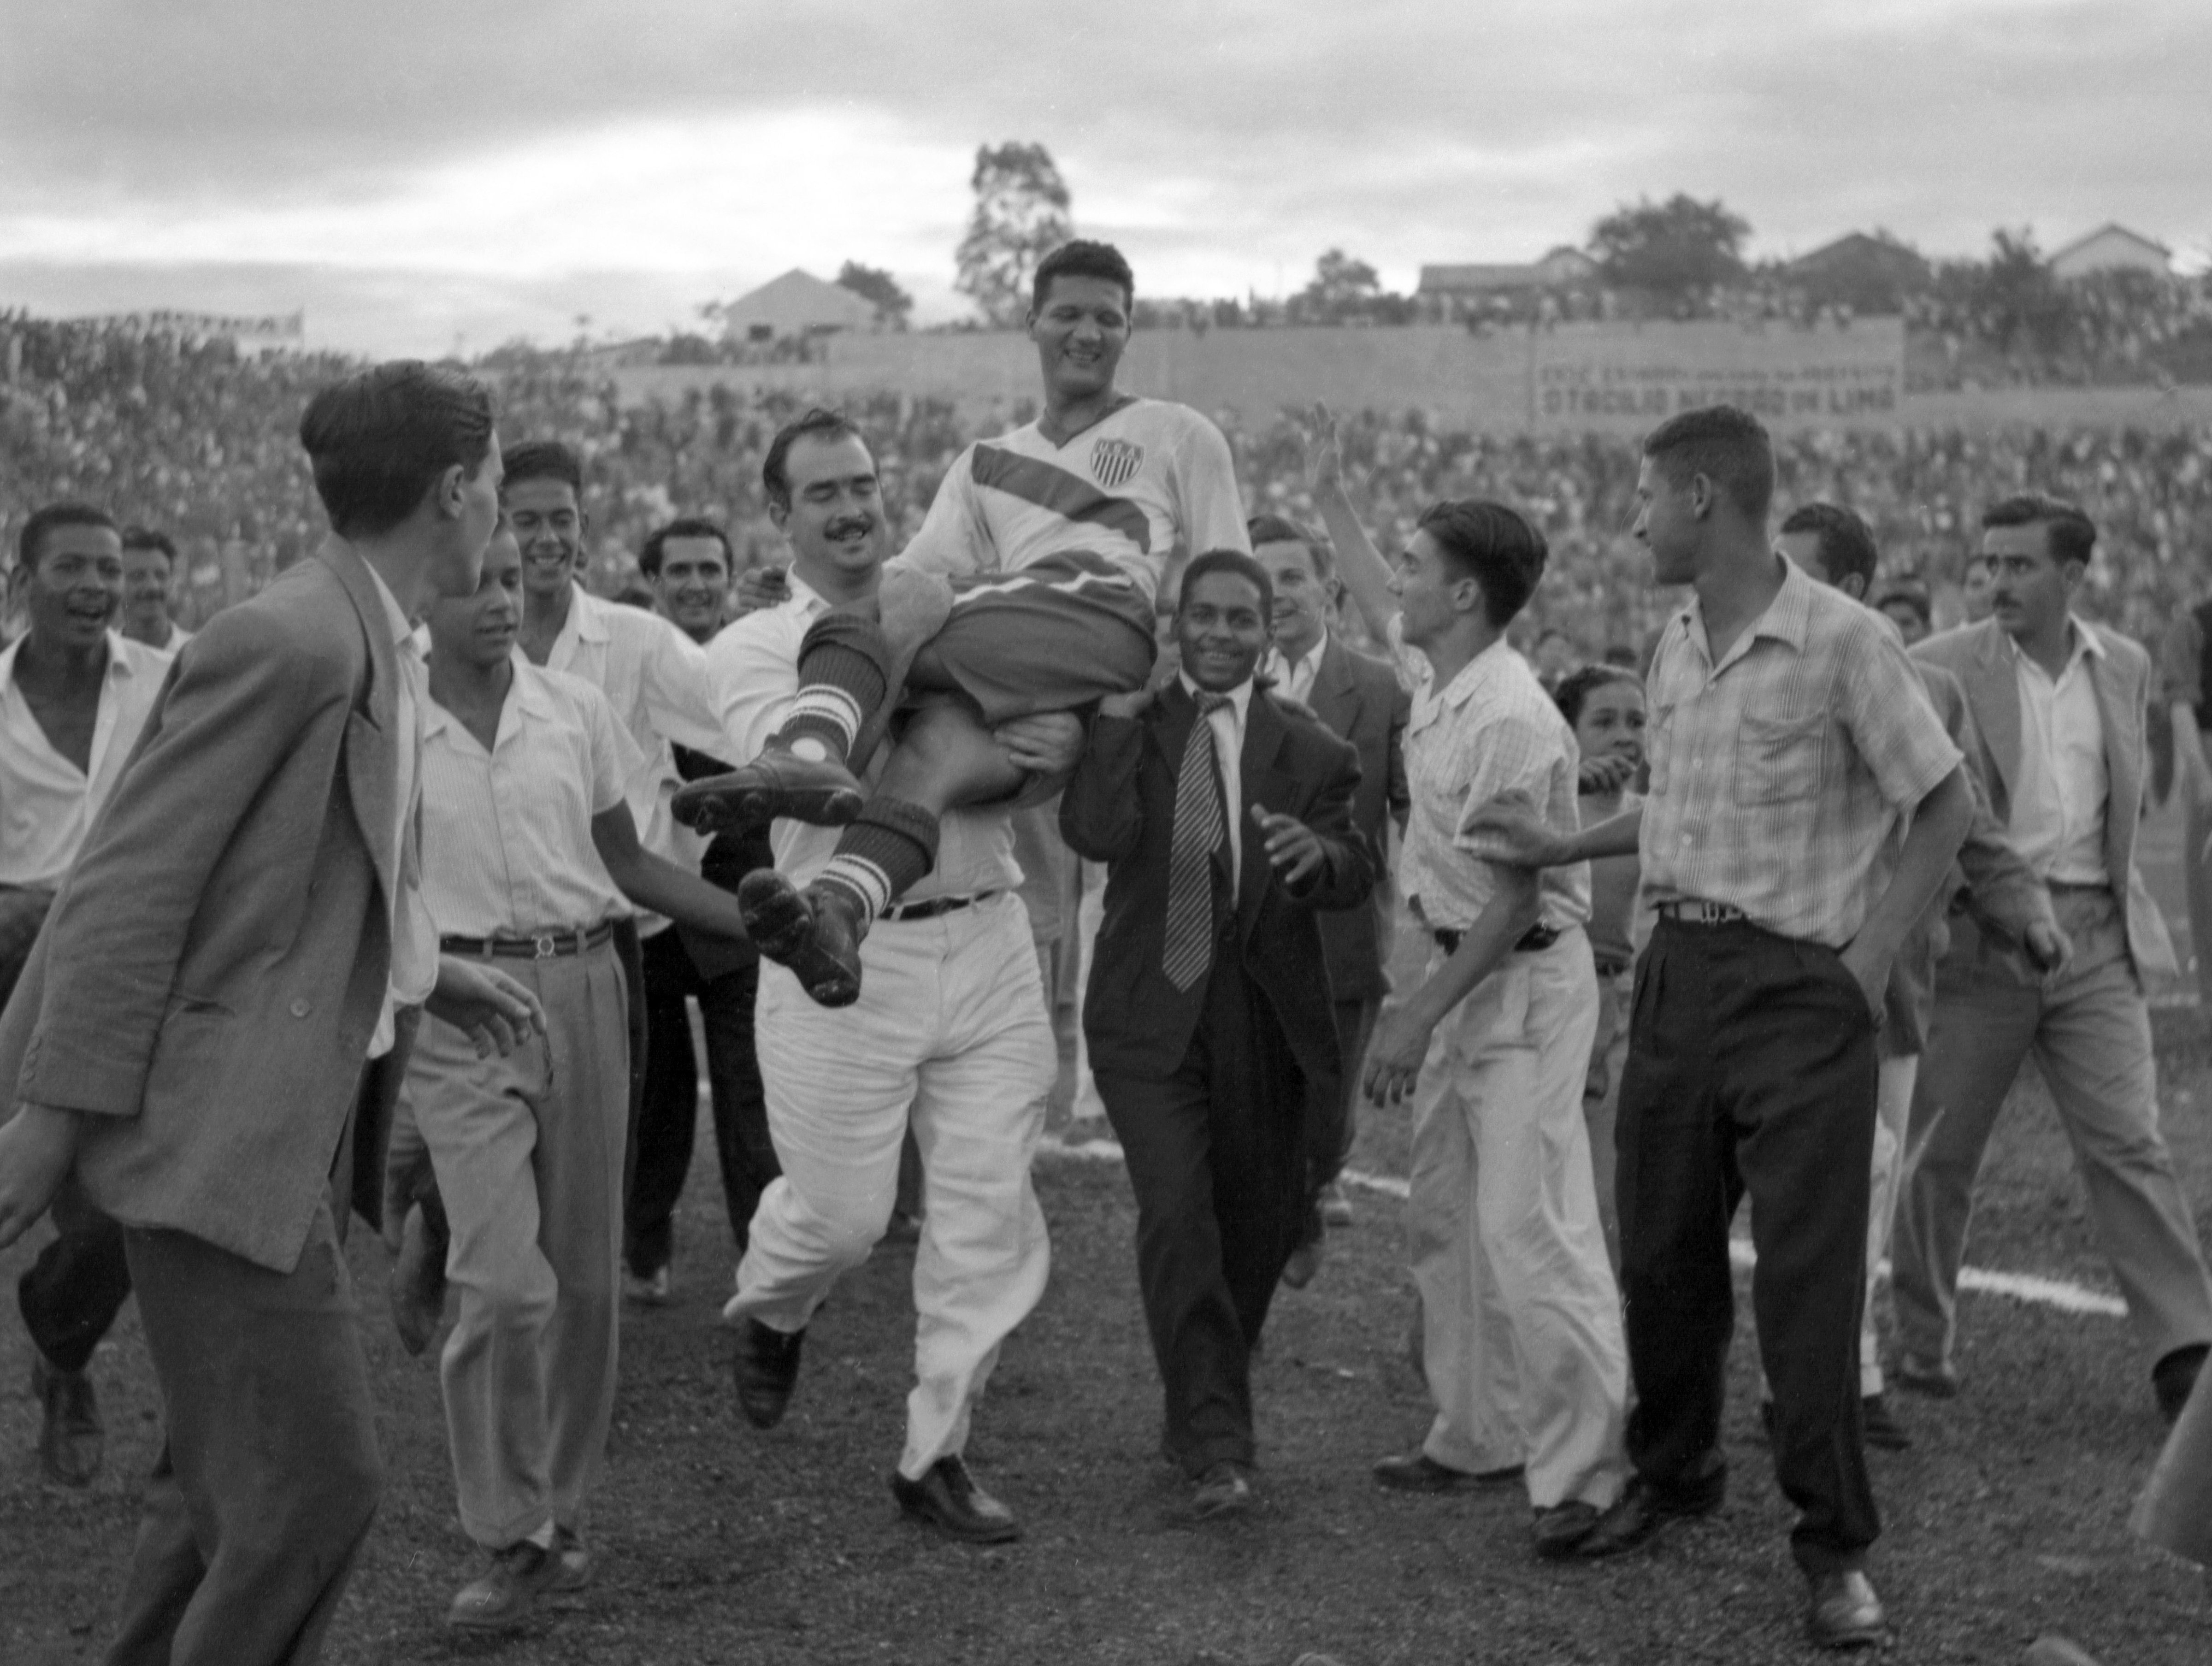 United States striker Joe Gaetjens is carried away by cheering fans after Team USA defeated England 1-0 in a World Cup soccer match on June 28, 1950 in Belo Horizonte, Brazil.  (AP)